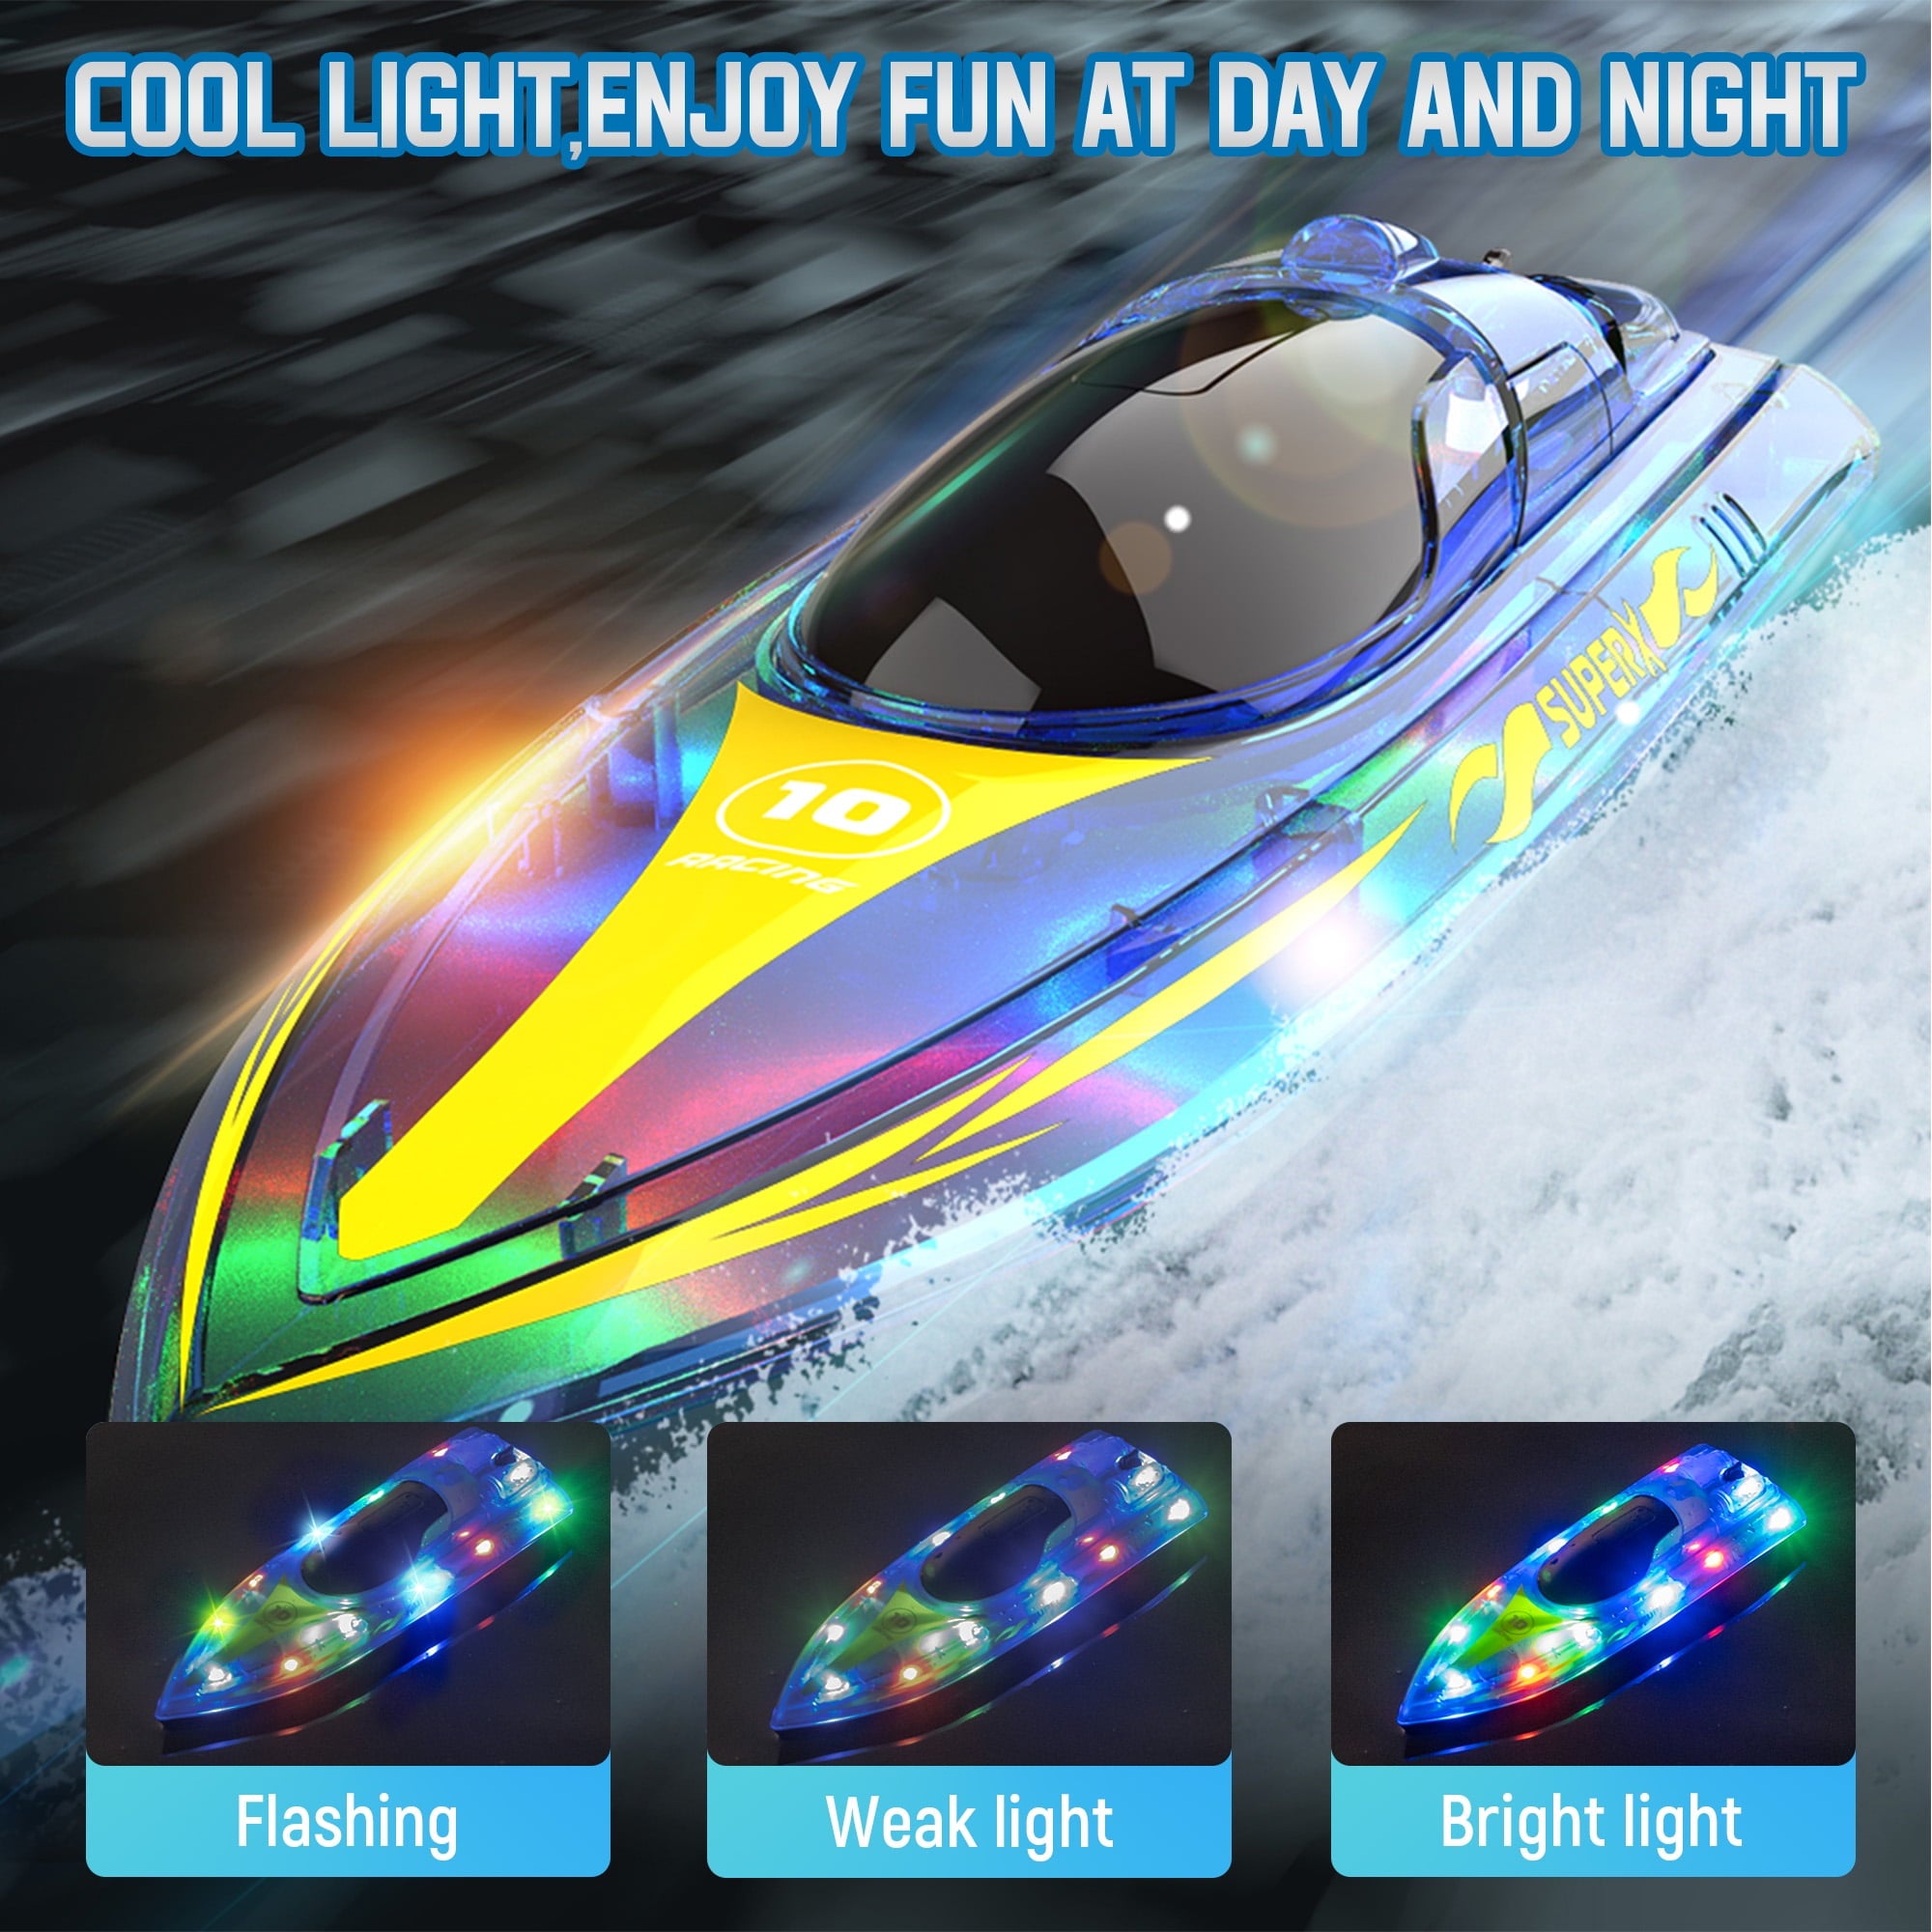 Remote Control Speedboat 15KM/H Waterproof Electric Colorful Boat Water Toy For Kids